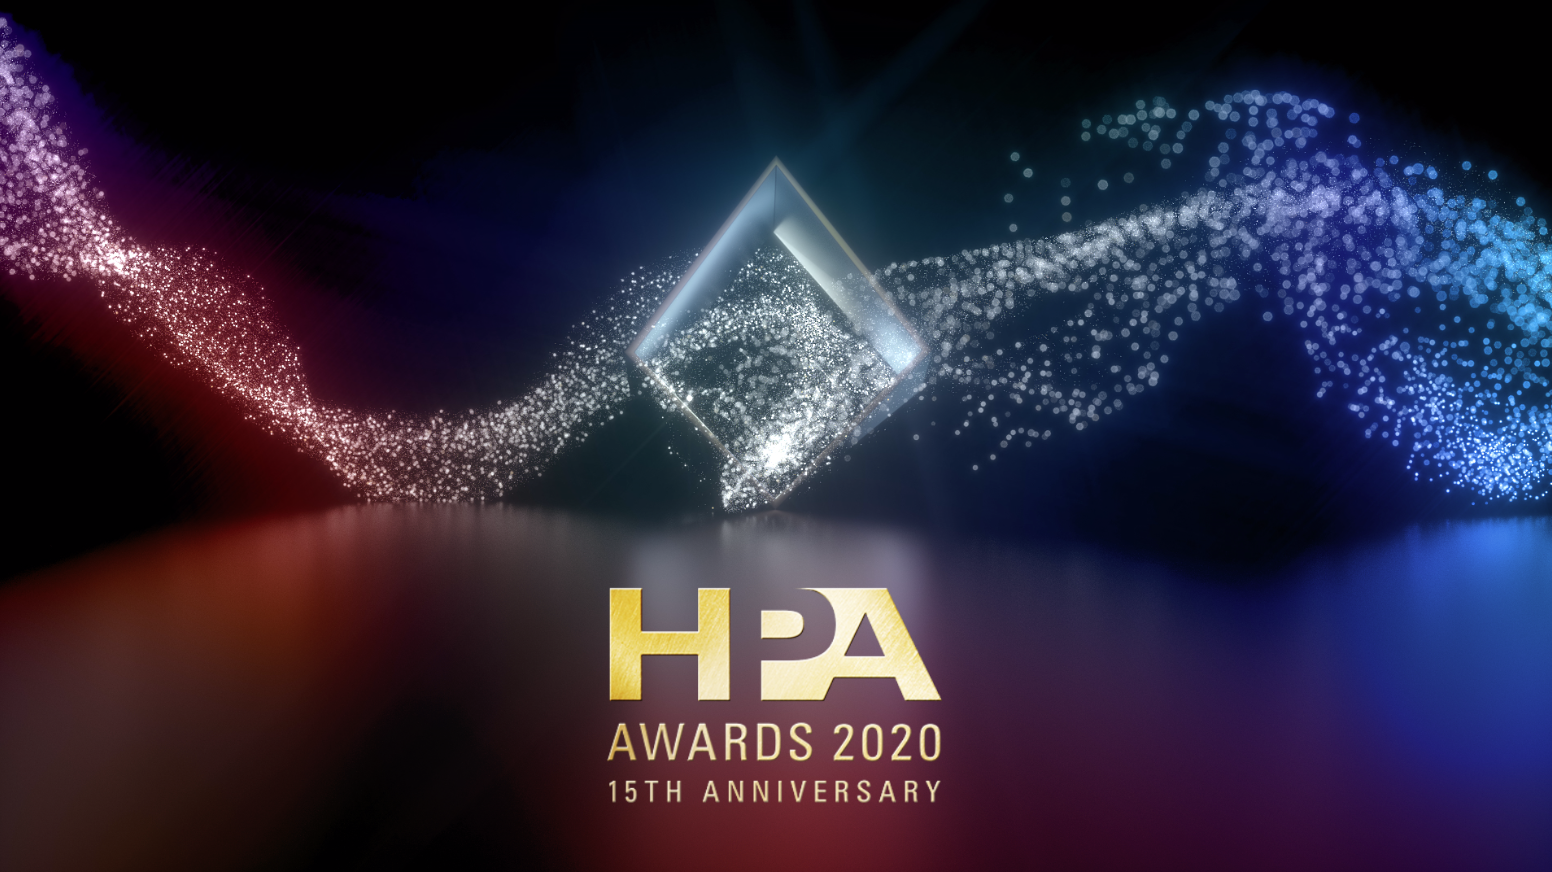 HPA Awards 2020 - VIRTUAL EVENT